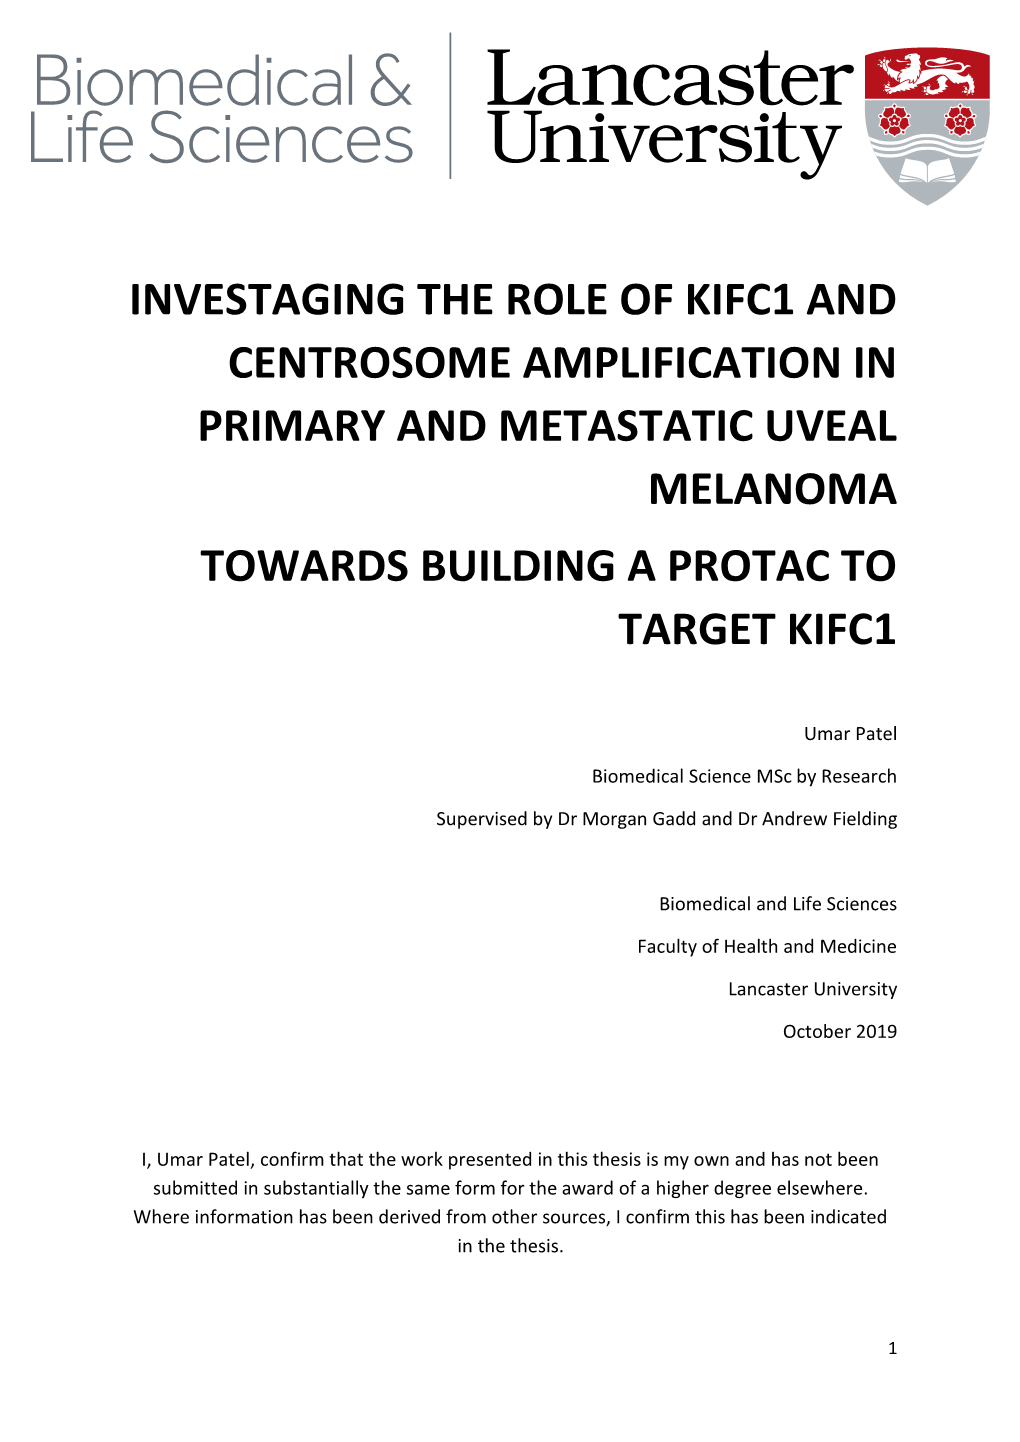 Investaging the Role of Kifc1 and Centrosome Amplification in Primary and Metastatic Uveal Melanoma Towards Building a Protac to Target Kifc1